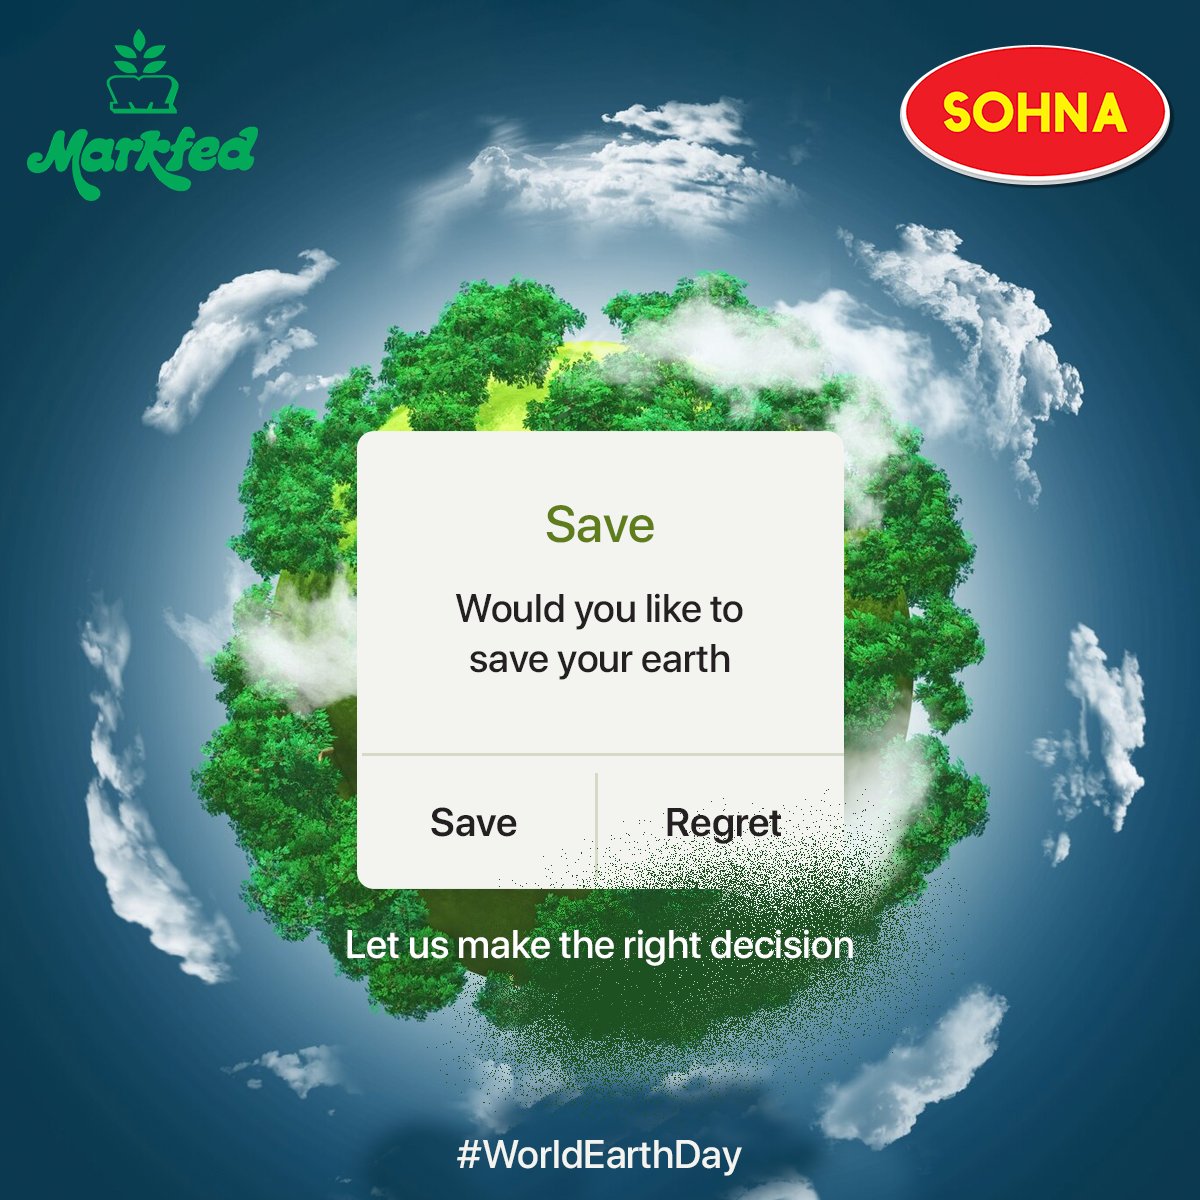 On World Earth Day, let's pledge to make the right decision for a sustainable tomorrow. 🌍 #SOHNA #SOHNAMarkfed #Punjab #SaveEarth #WorldEarthDay #GoGreenSaveGreen